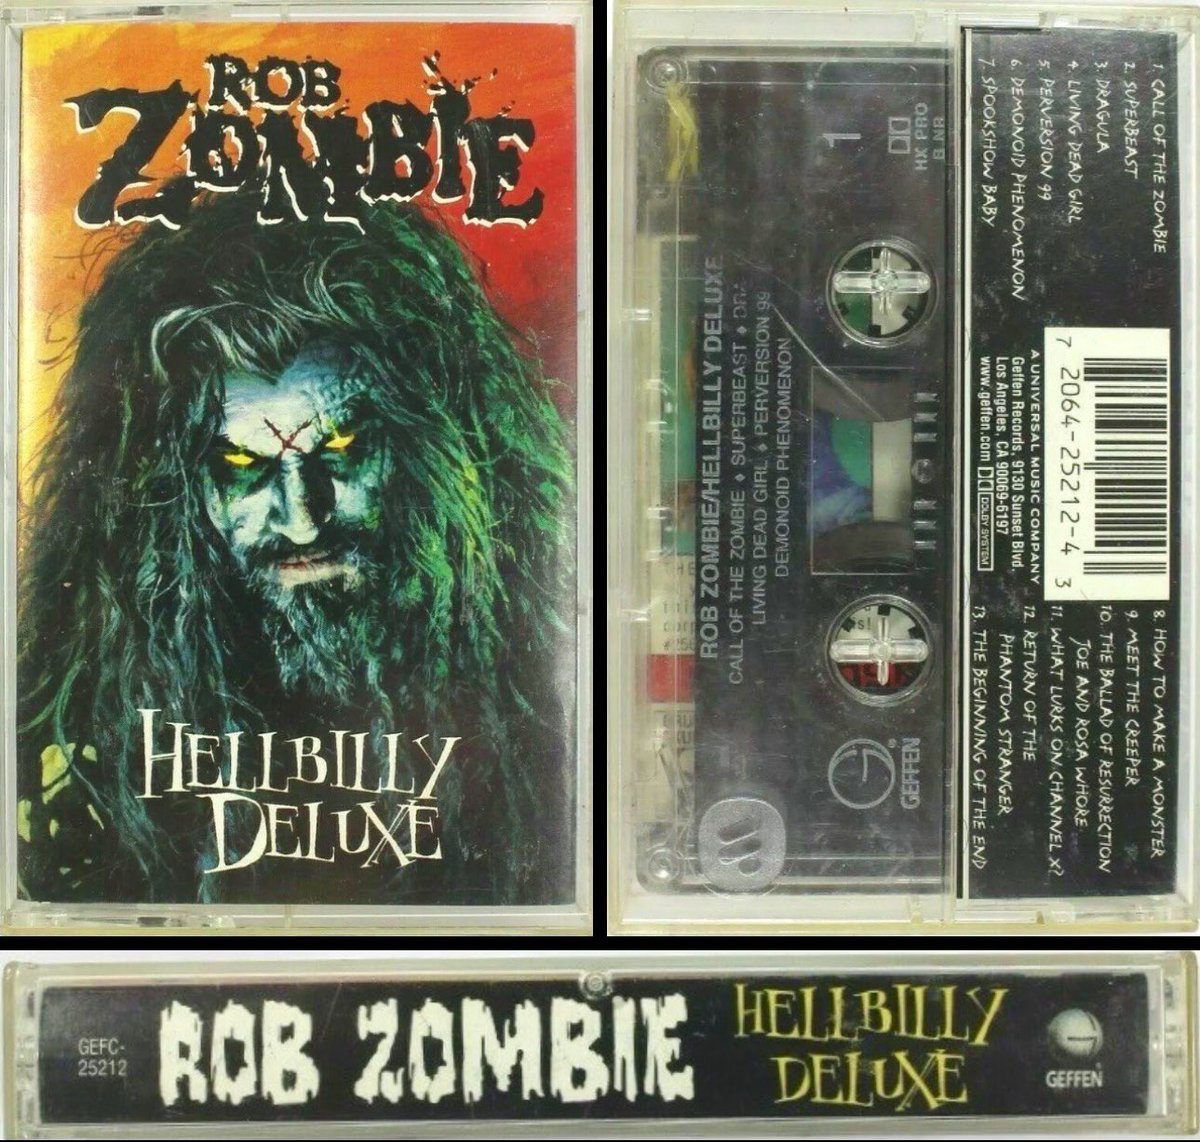 ROB ZOMBIE’S HELLBILLY DELUXE (1998) • SOUNDTRACK CASSETTE TAPE